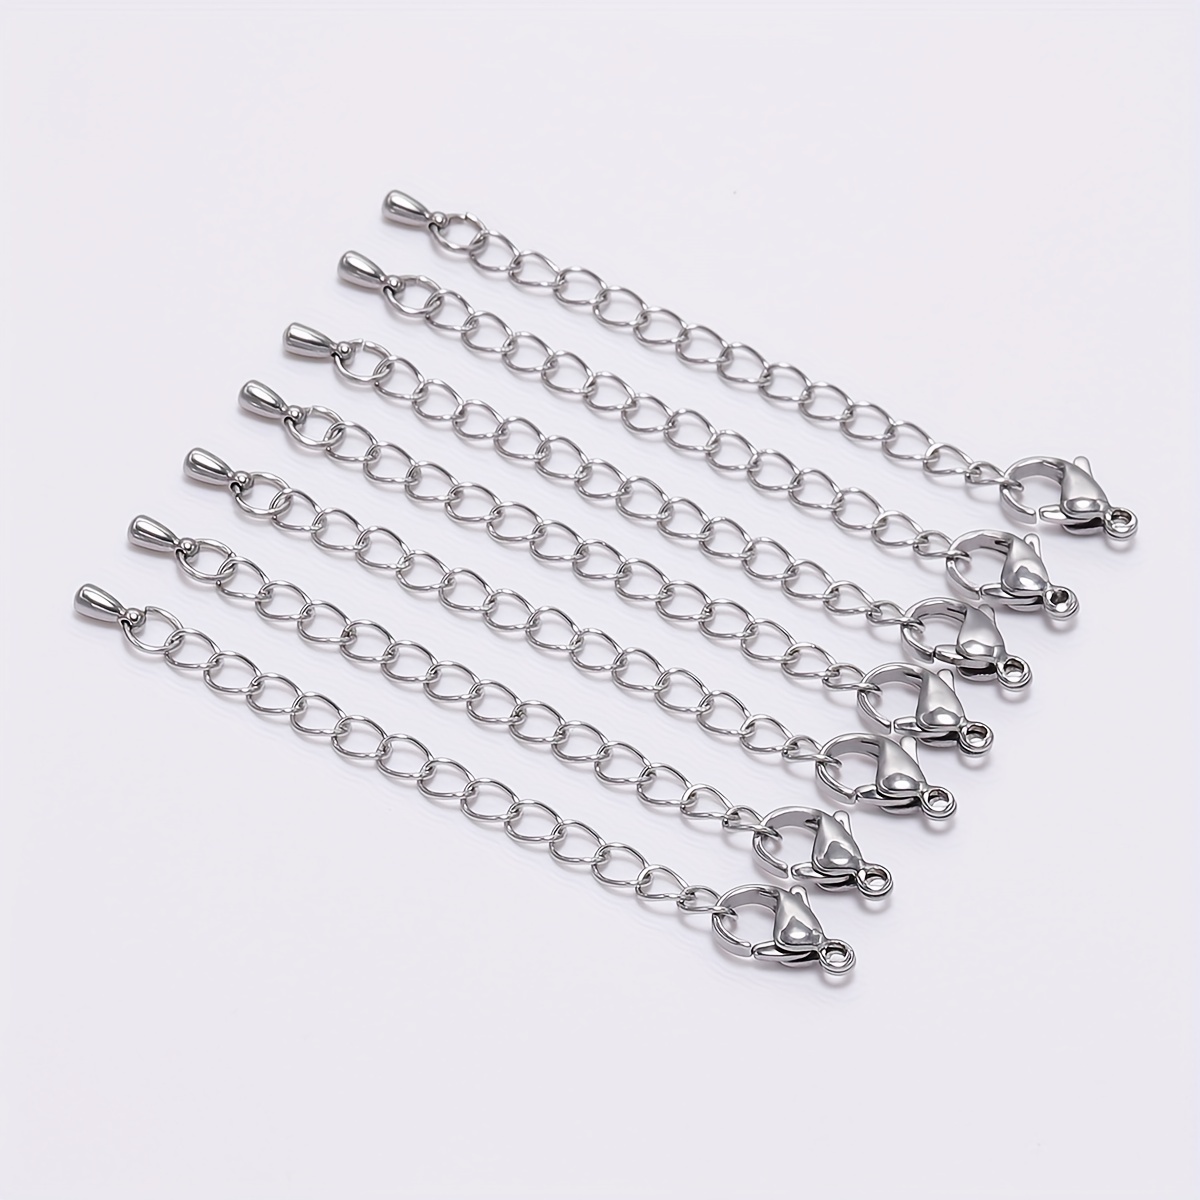 10pcs/lot Stainless Steel Lobster Clasps DIY Necklace Bracelet Lobster Clasp  Hooks Chains Connector For Jewelry Making